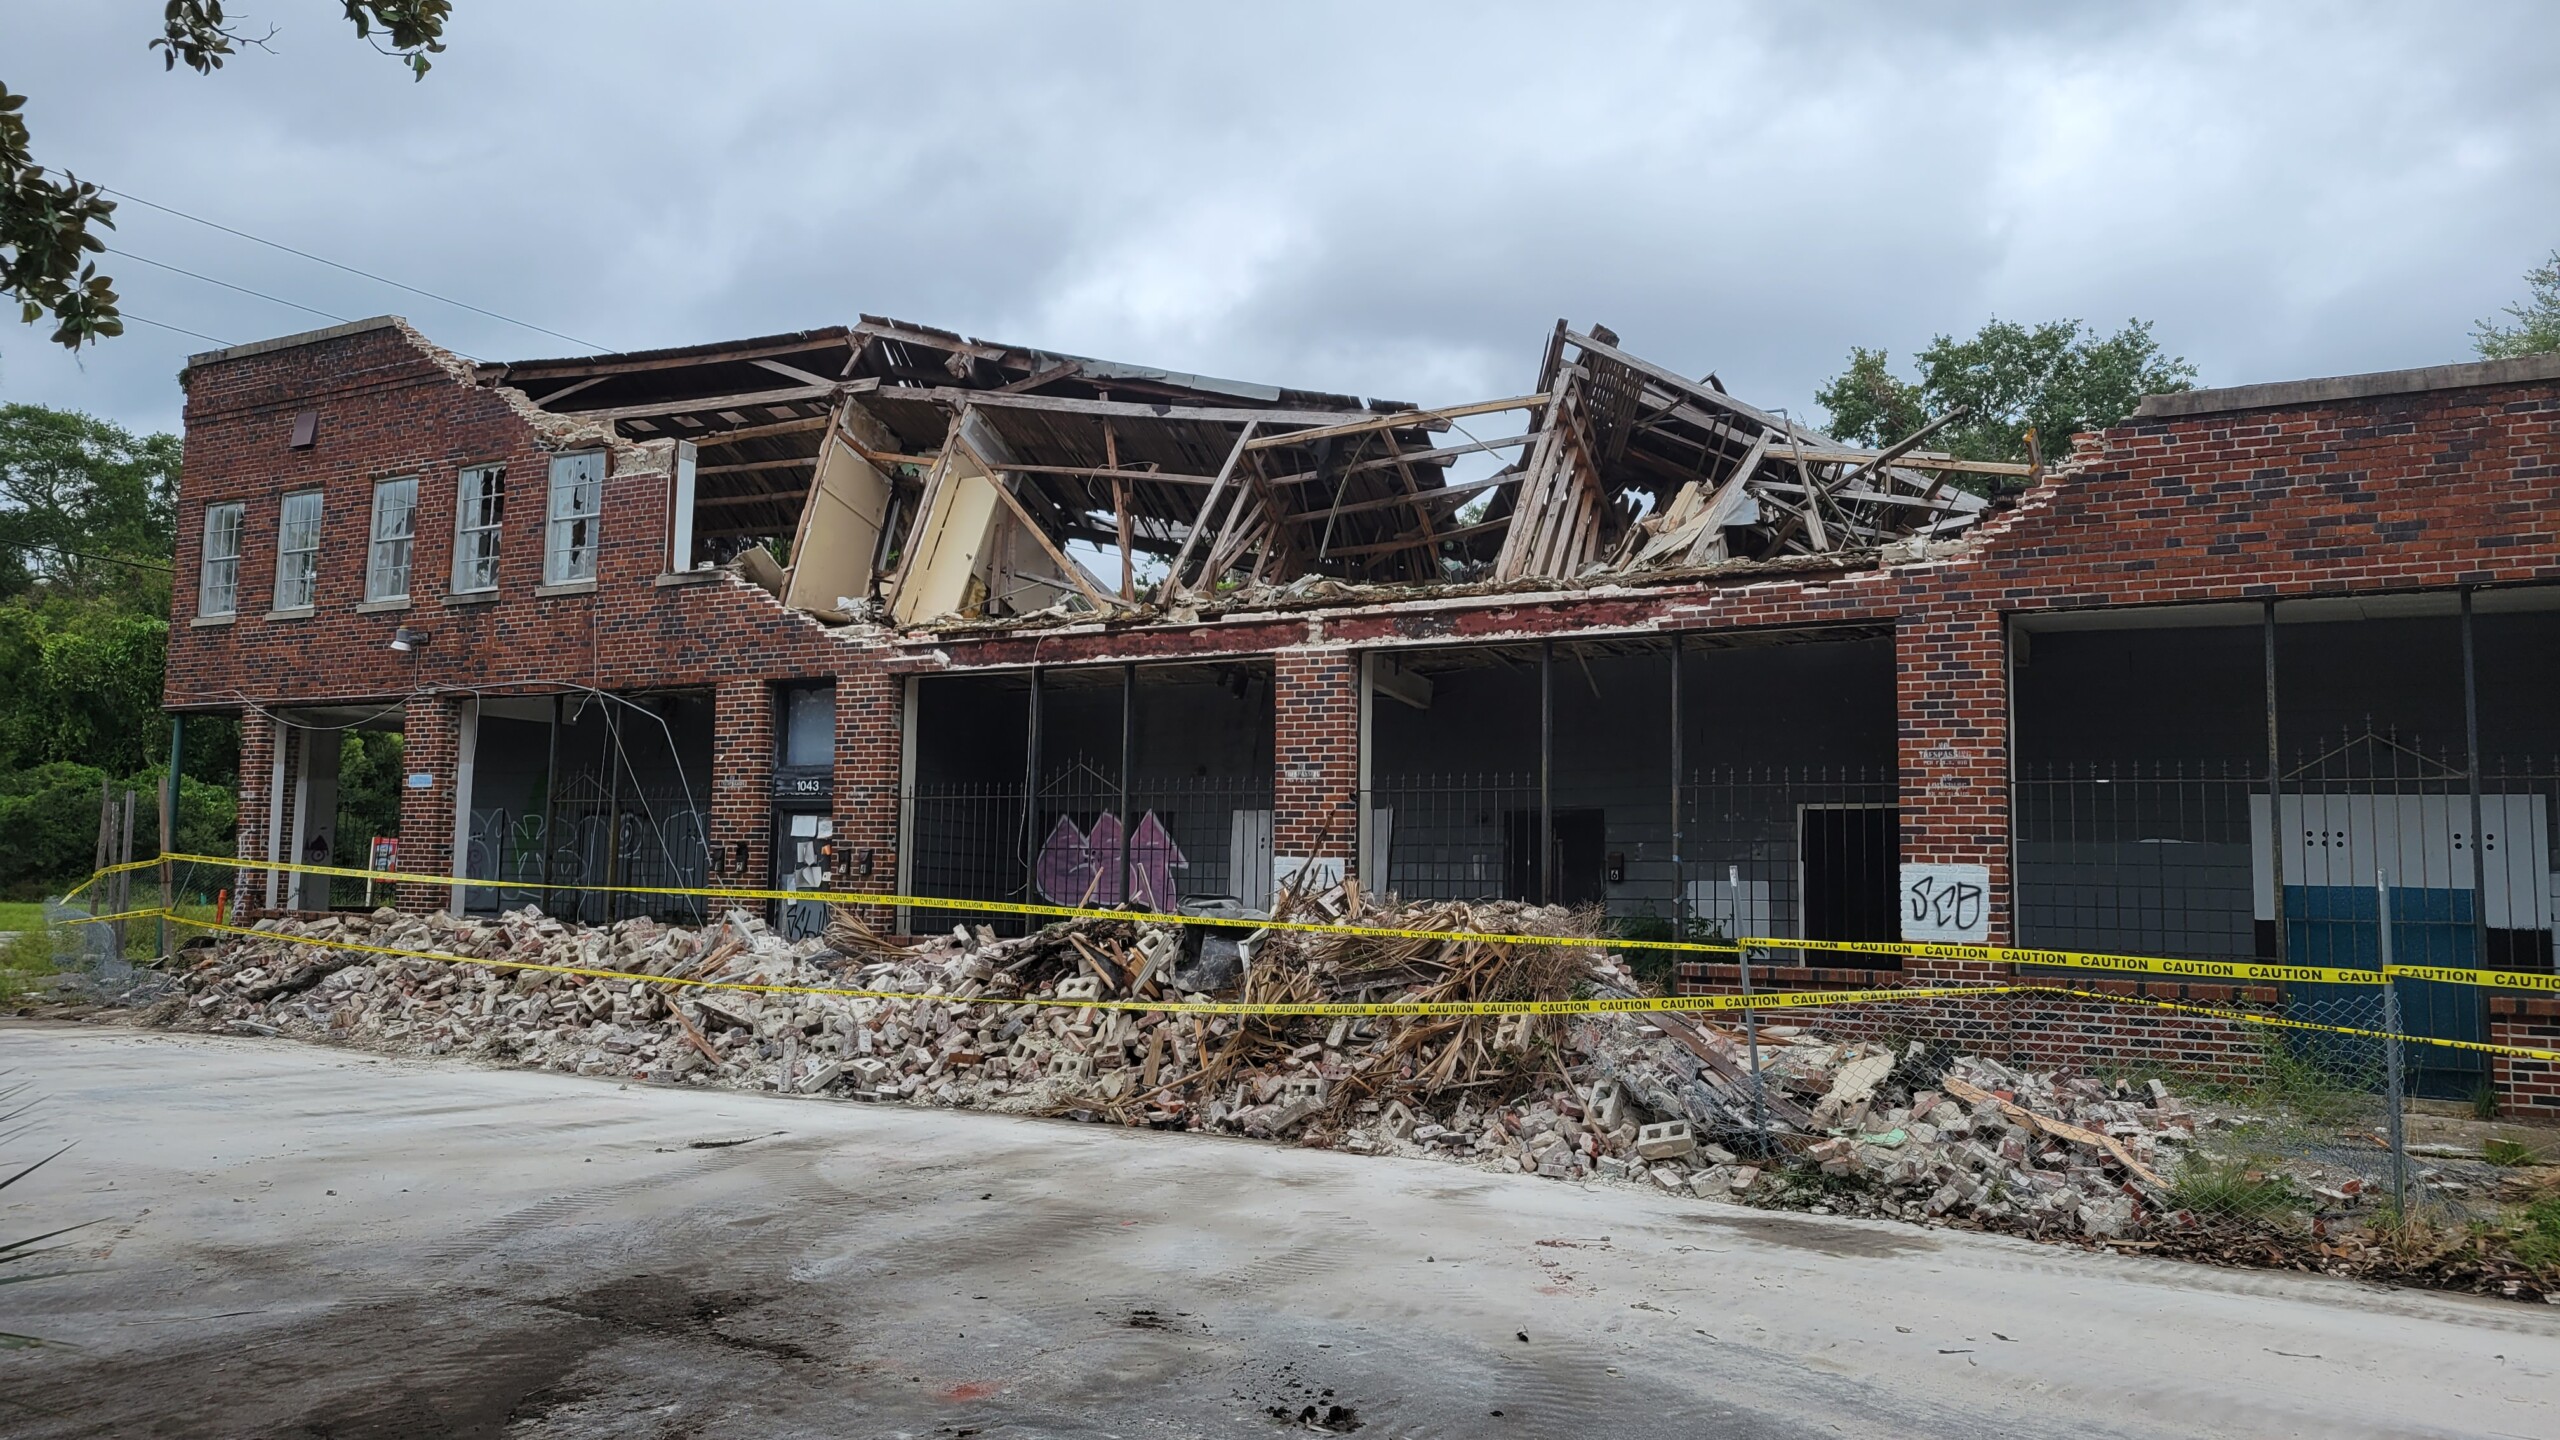 Featured image for “Condemned building collapses onto street during storm”